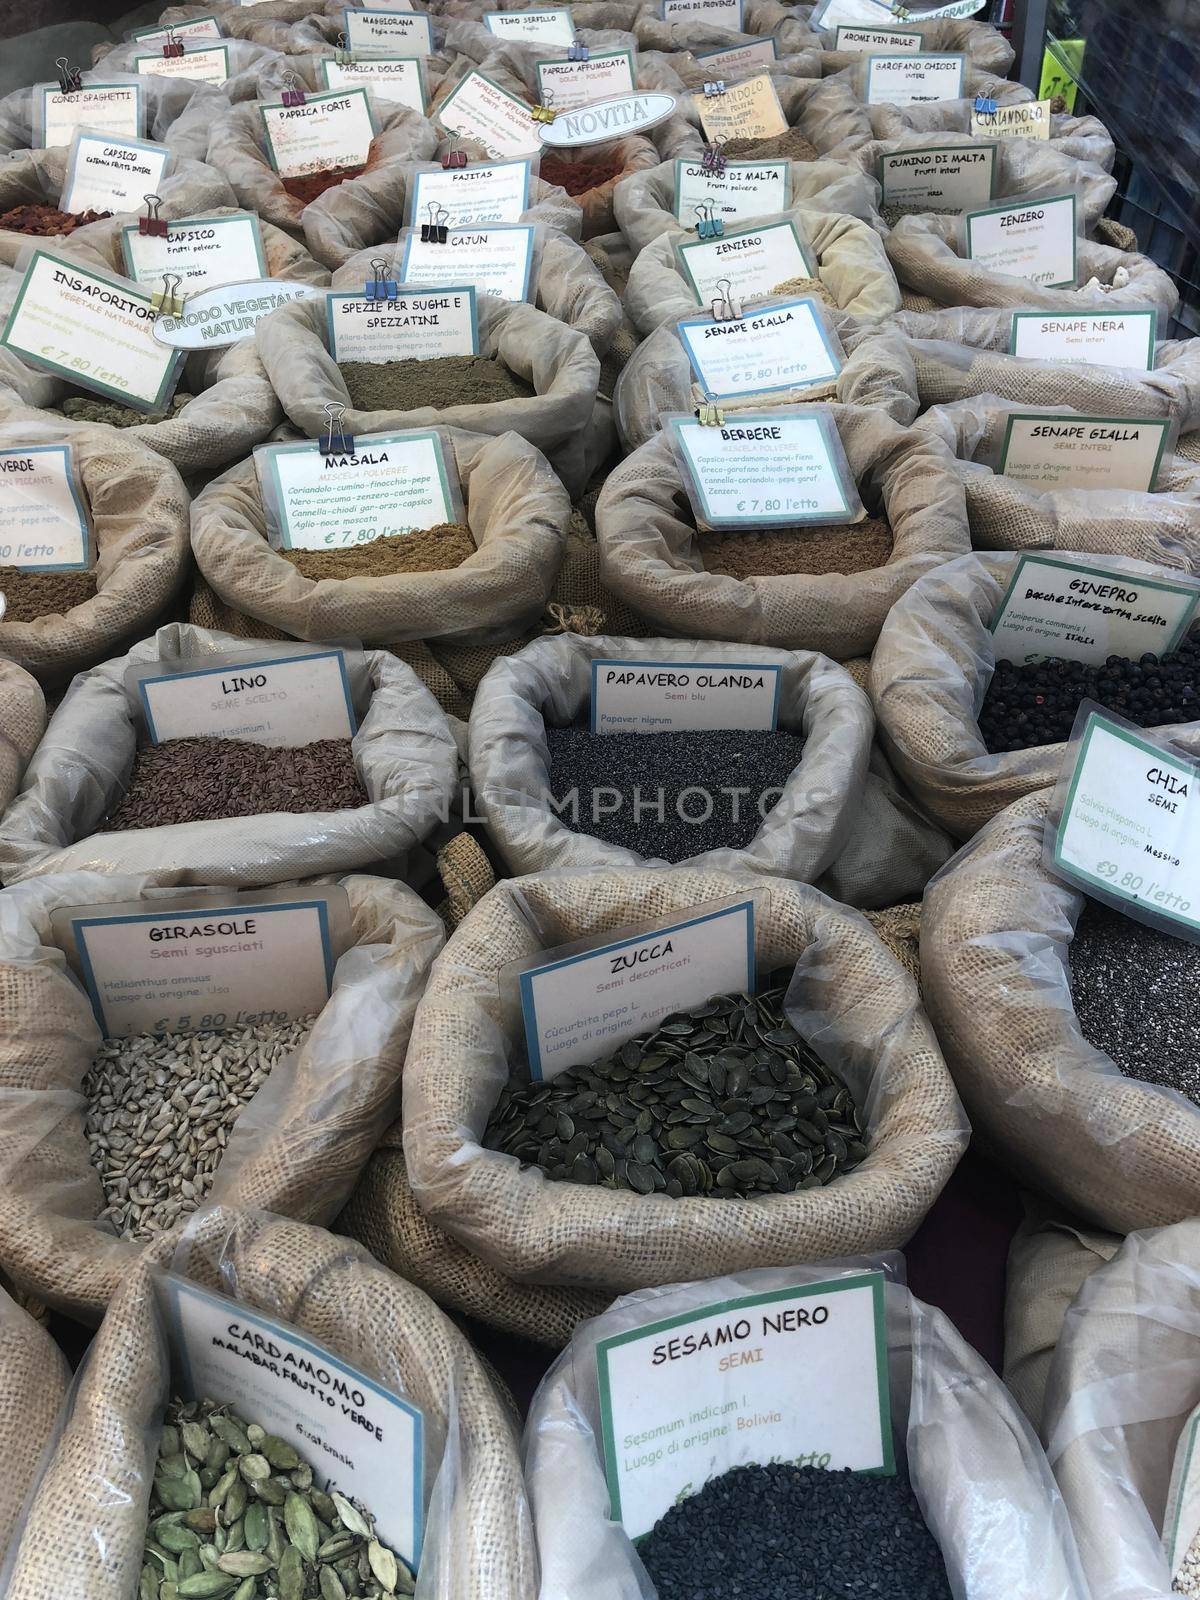 Assorted spices at italian market in the center of Florence, Italy by Mariakray